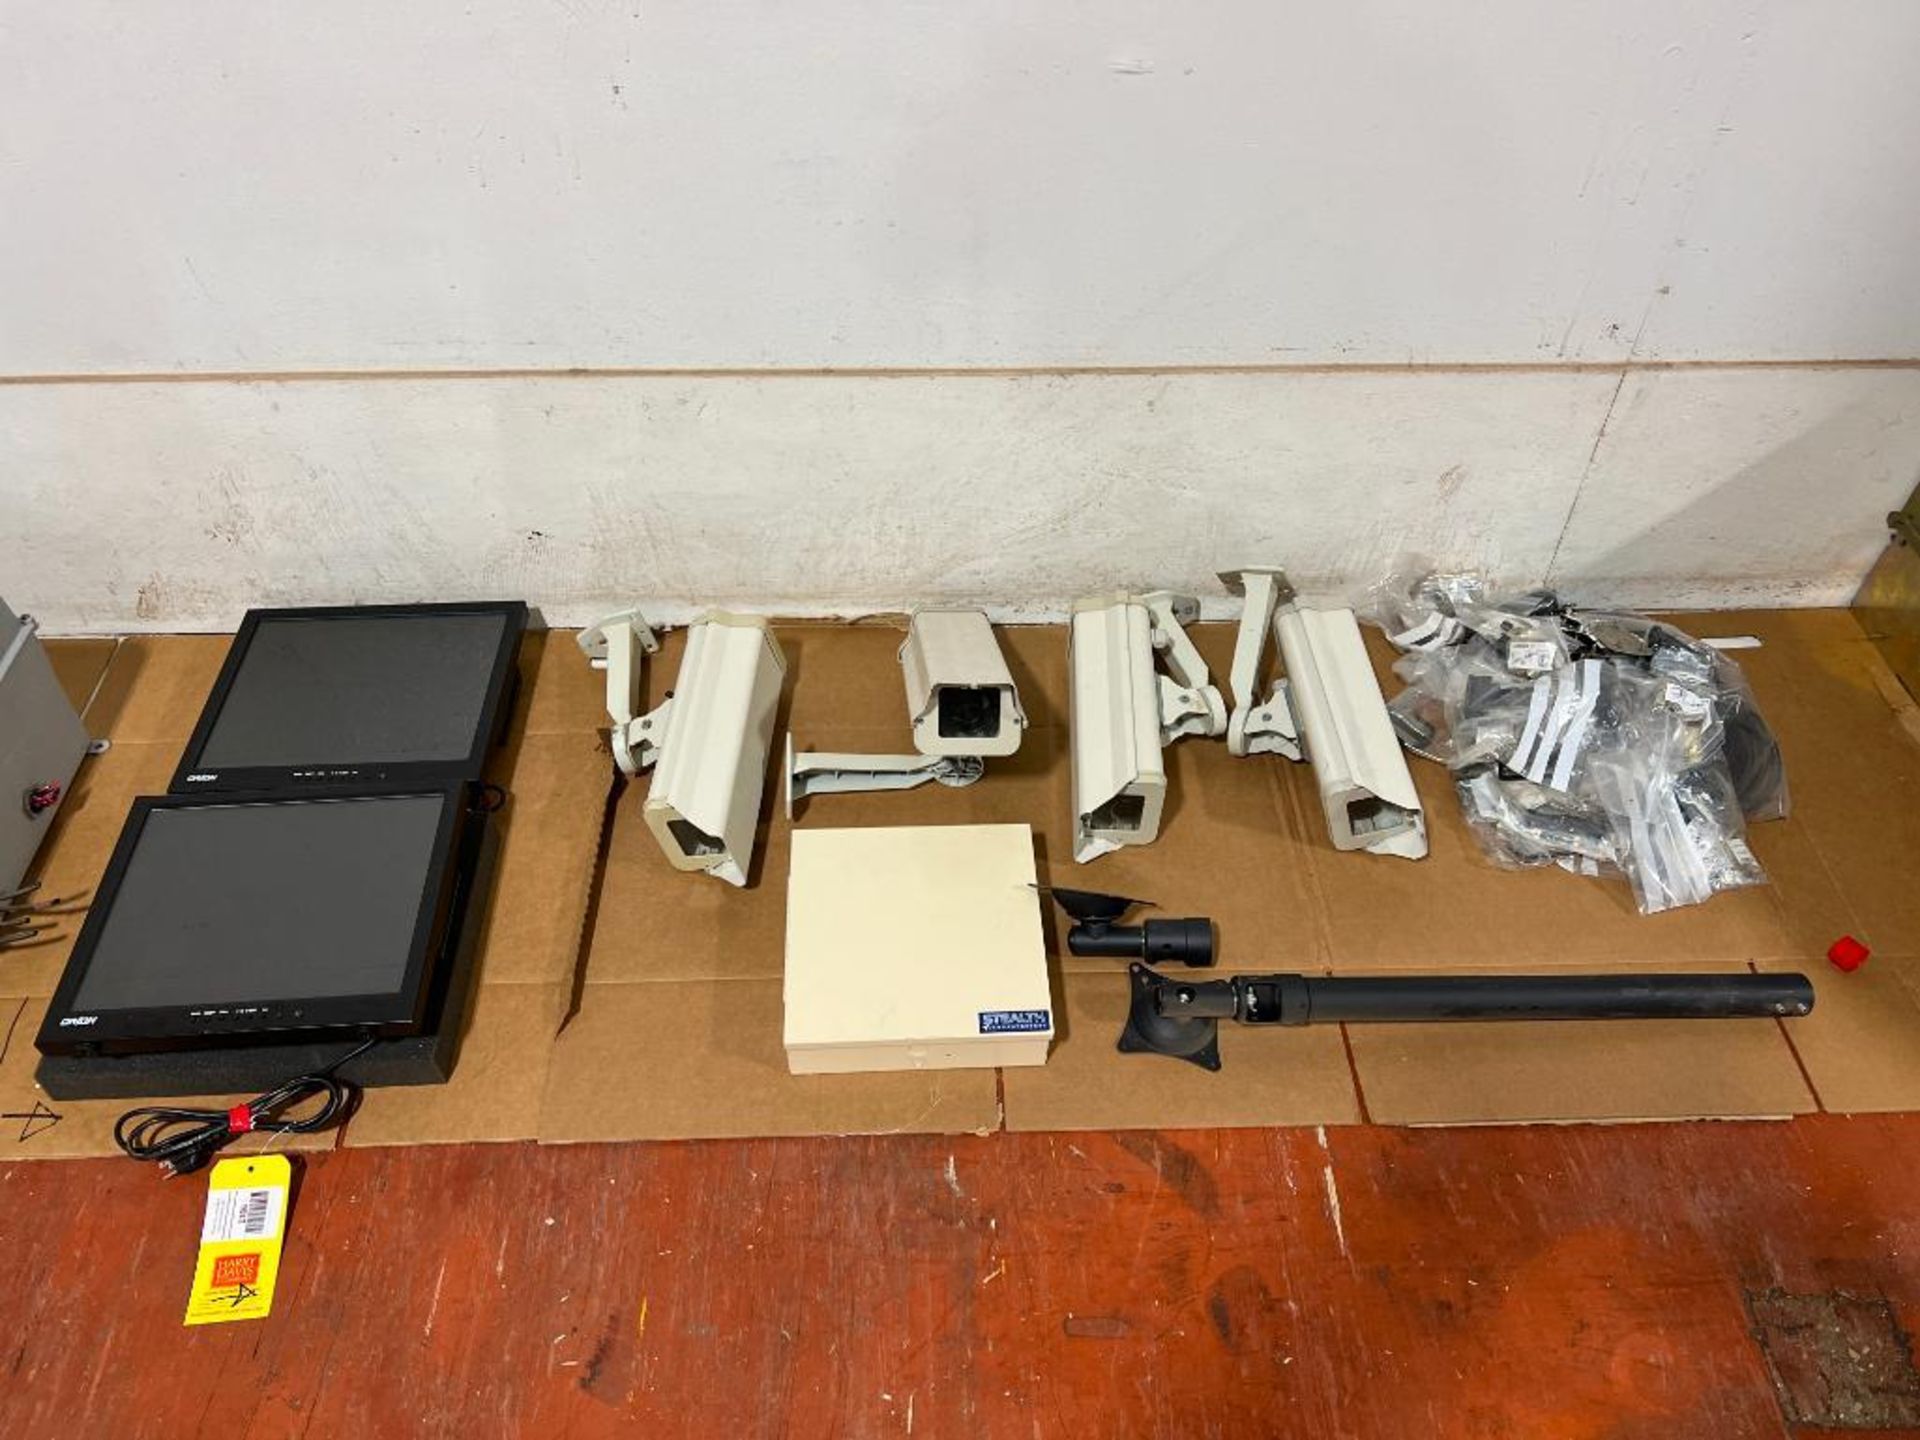 (2) Orion Security Monitors, Assorted Security Cameras and Hardware - Rigging Fees: $50 - Image 2 of 5